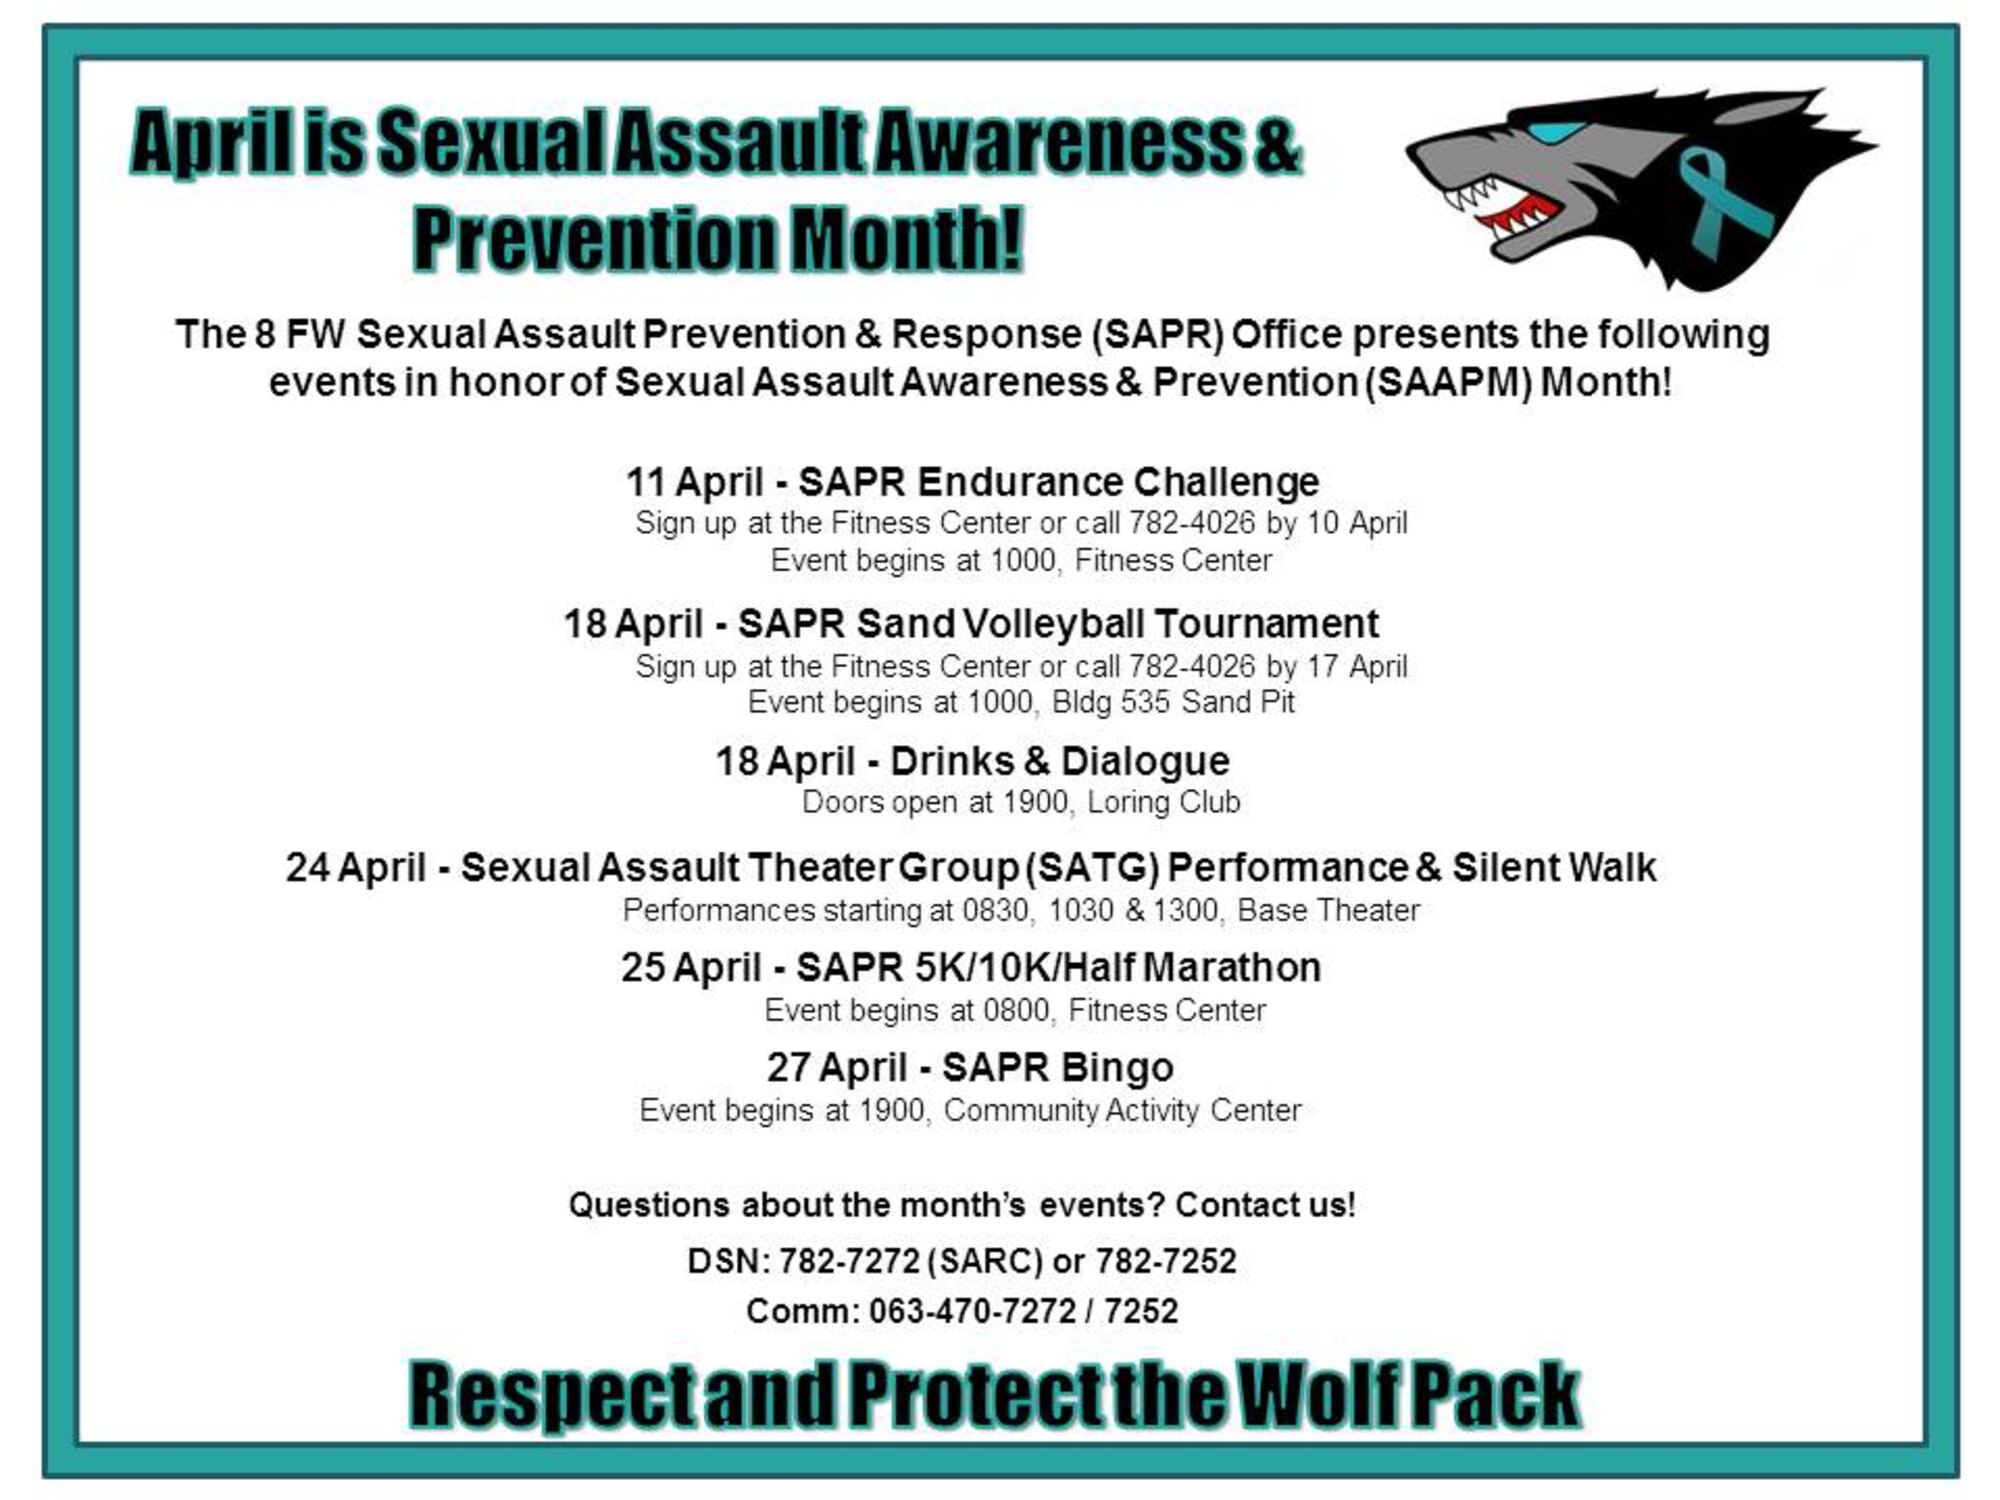 The 8 FW Sexual Assault Prevention & Response Office presents the following events in honor of Sexual Assault Awareness & Prevention Month. 
